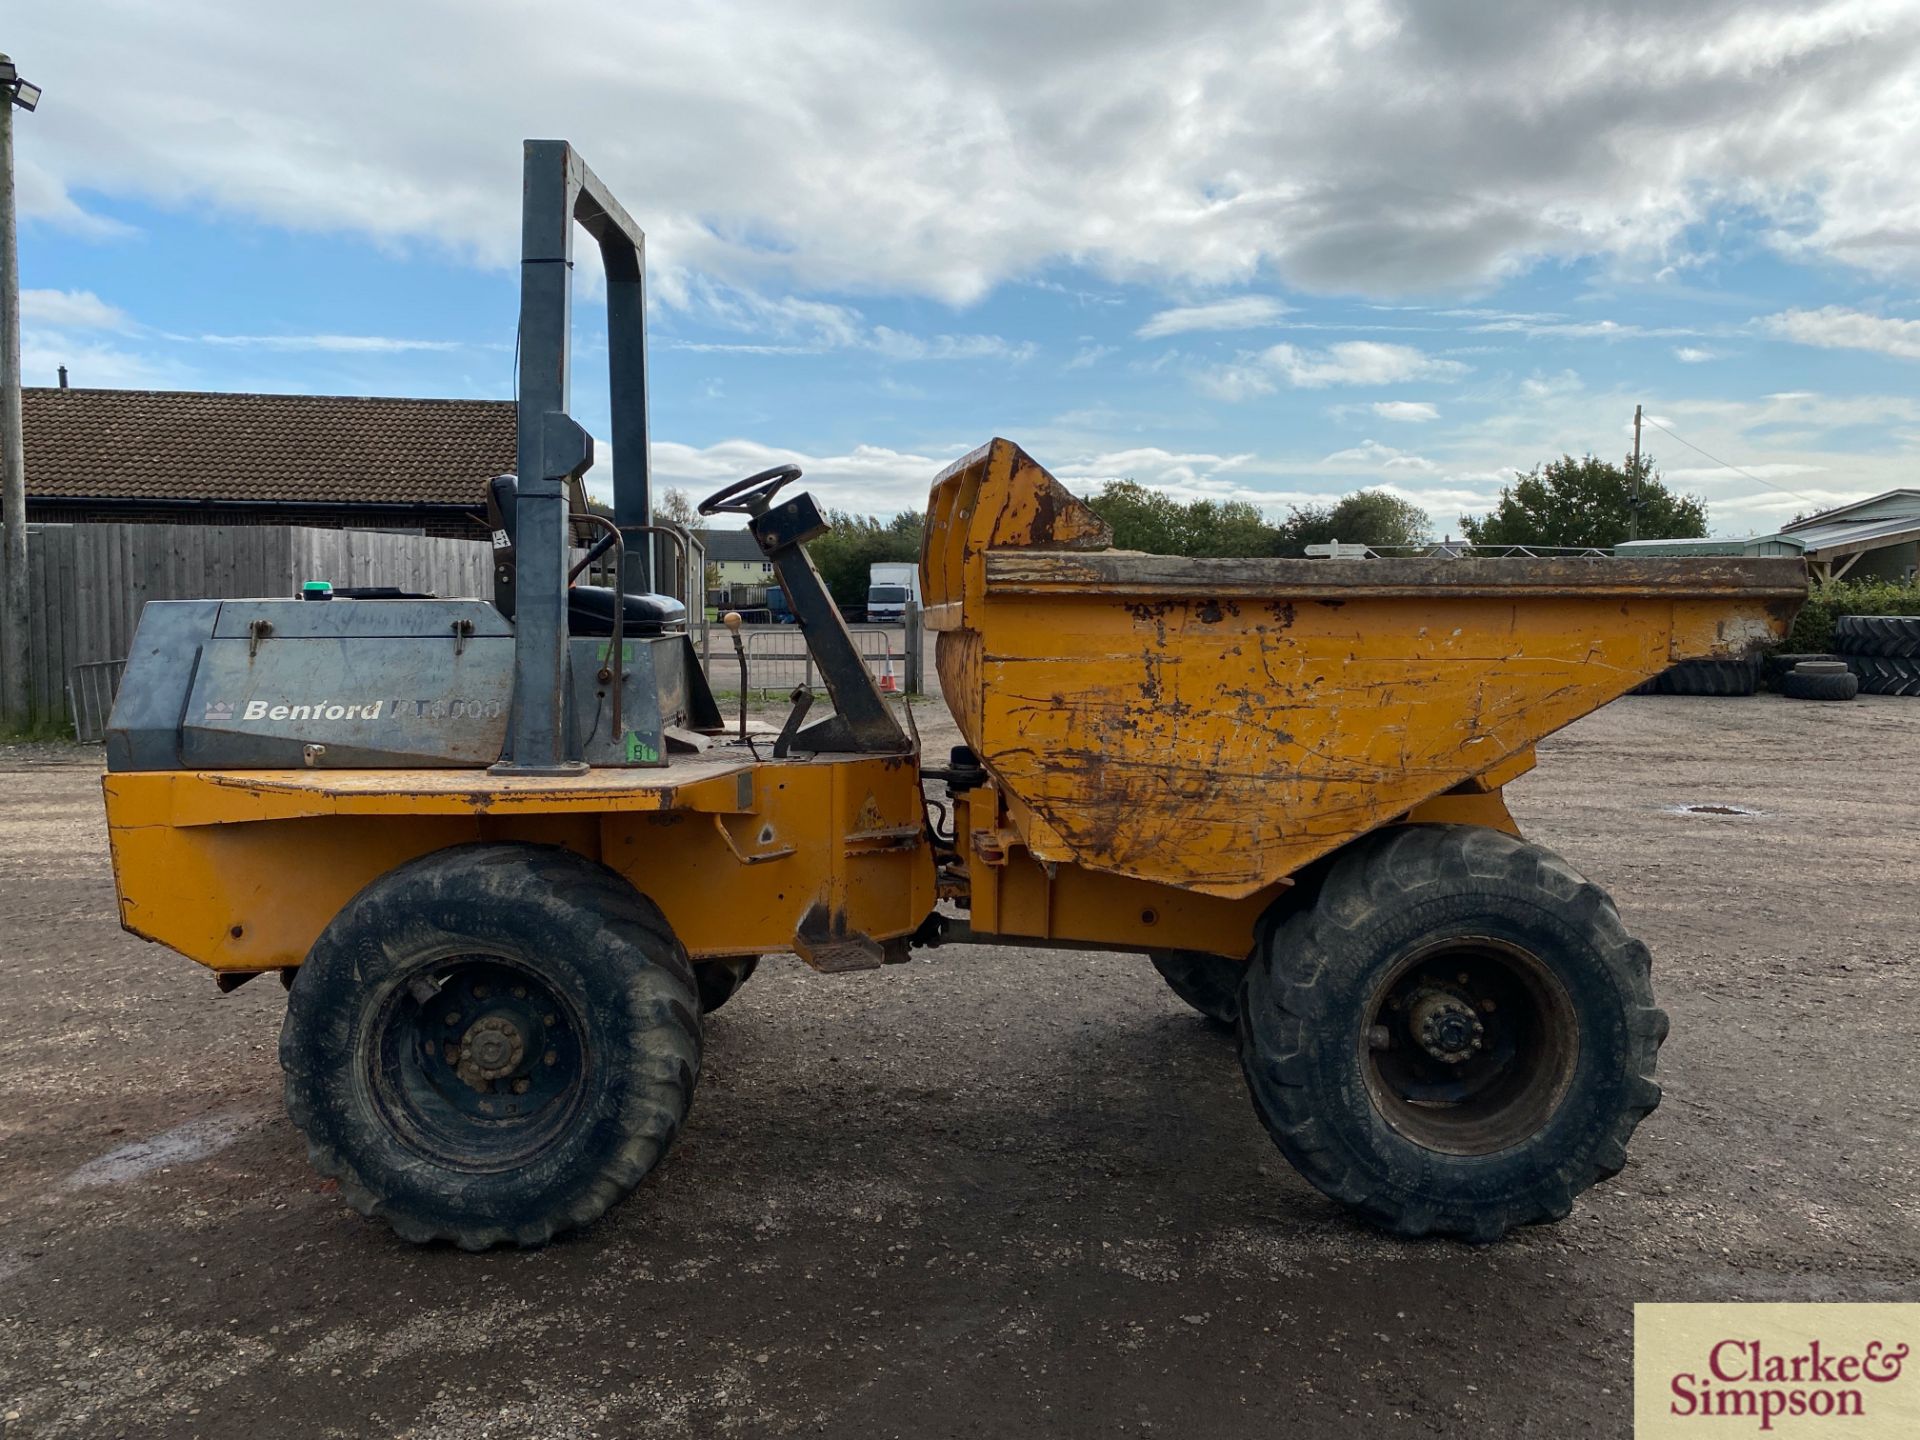 Benford 6T 4WD pivot steer dumper. 2000. Serial number SLBDNOOEY7H0721. 405/70R20 wheels and - Image 6 of 36